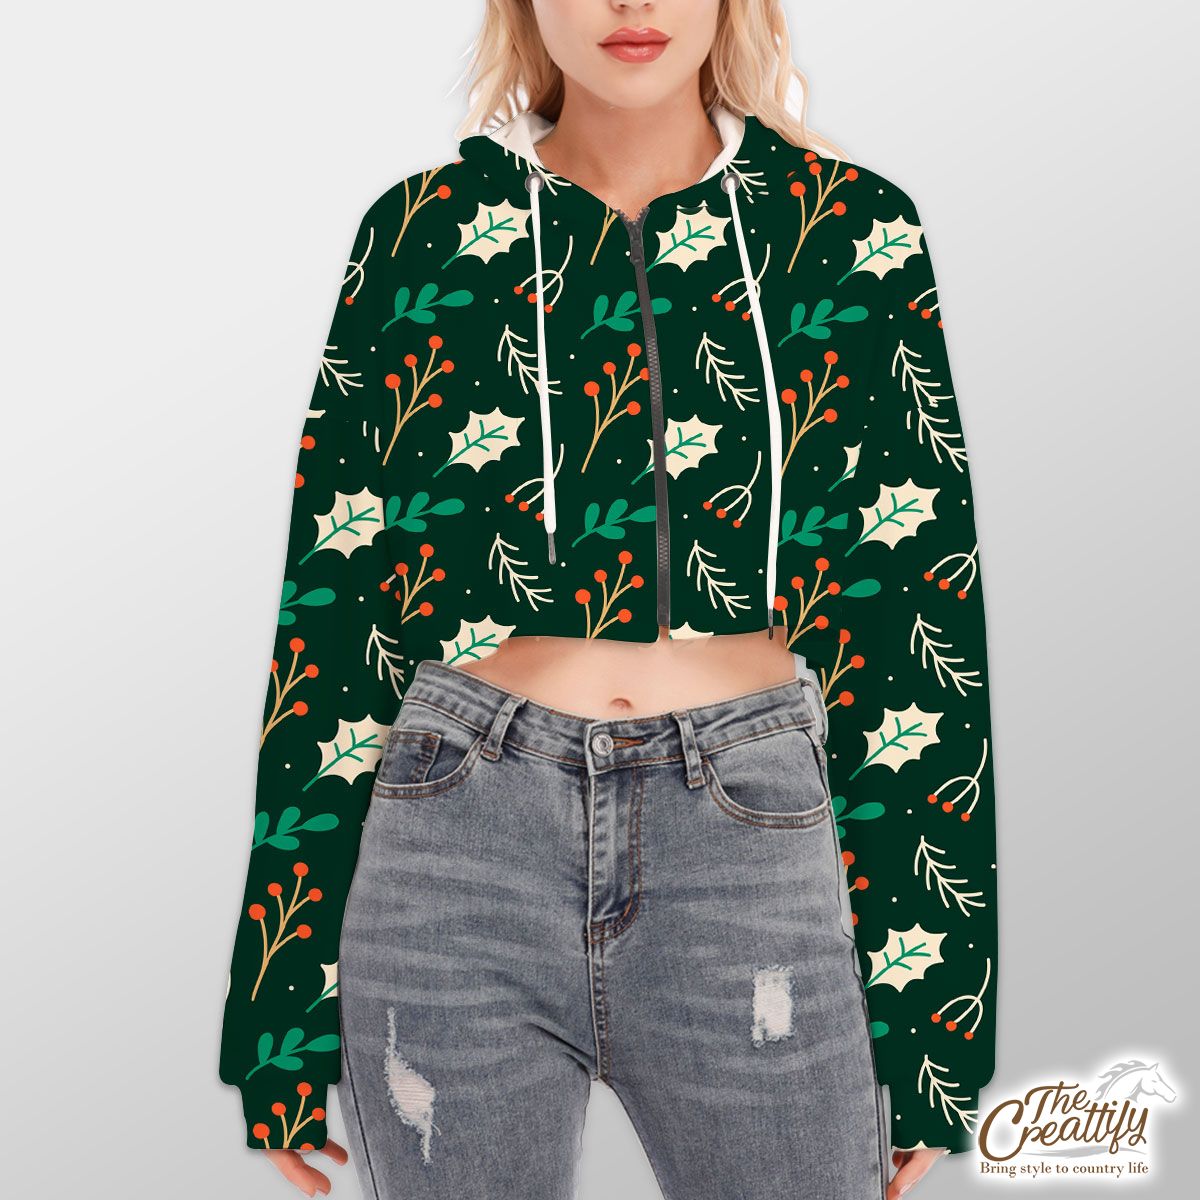 Red Berries And Holly Leaf Pattern Hoodie With Zipper Closure